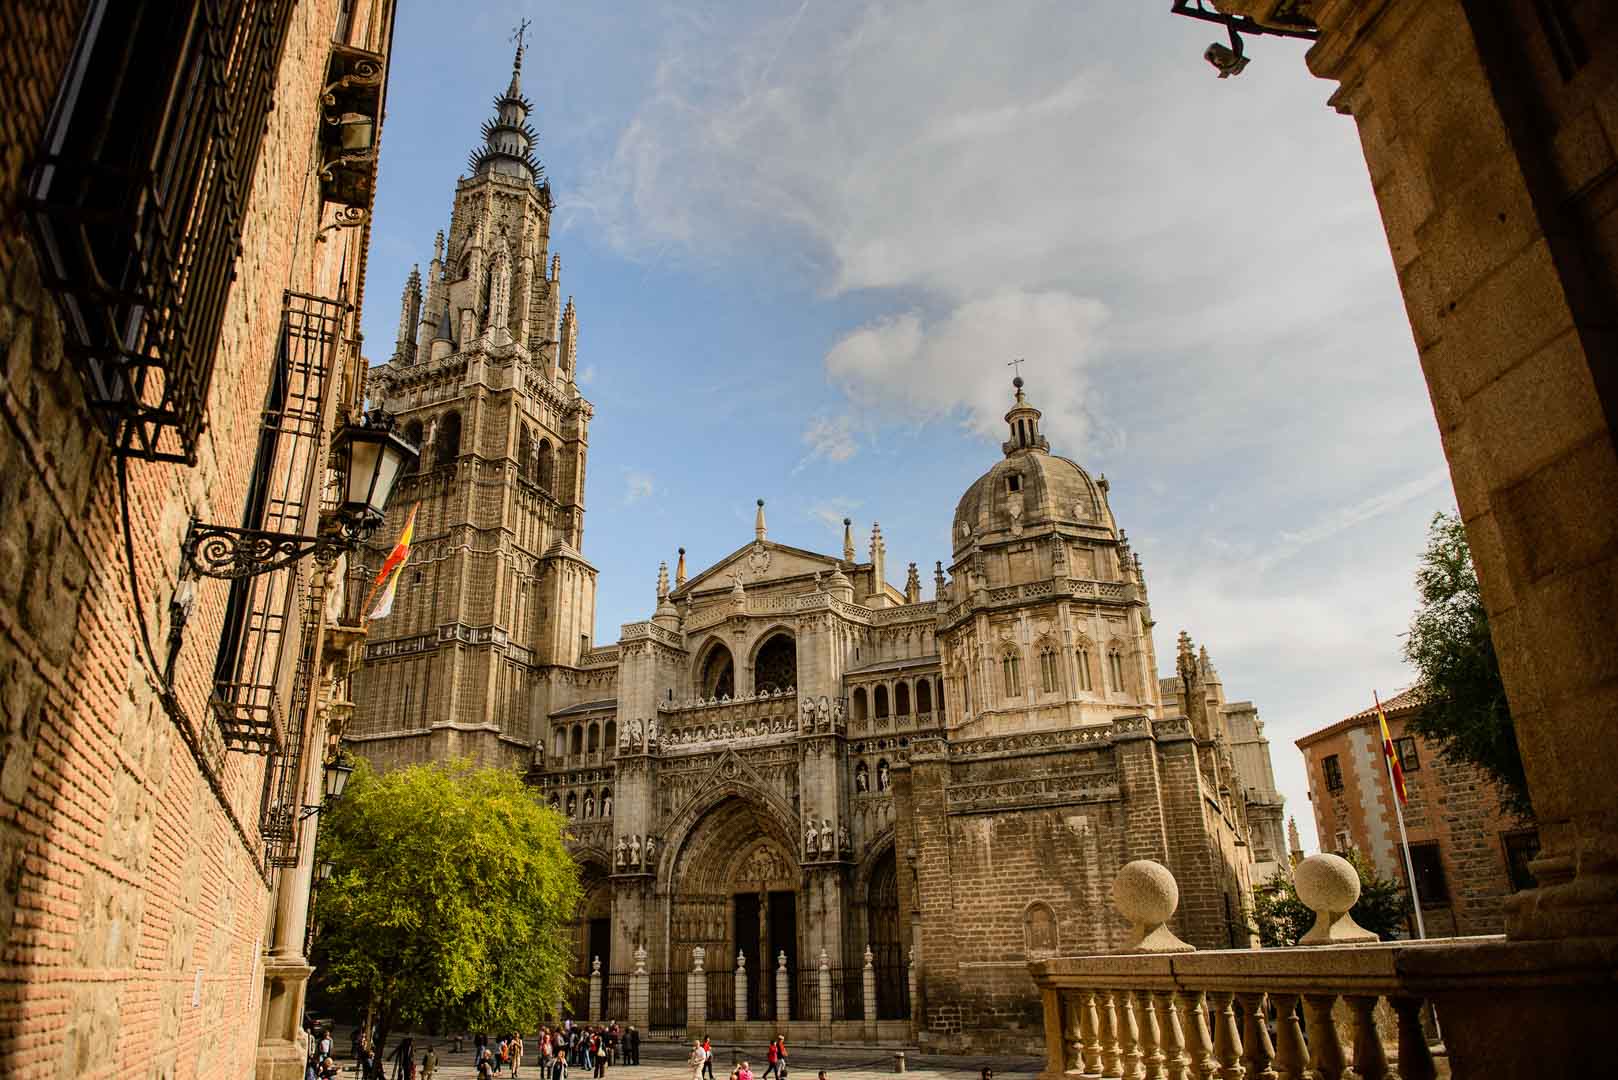 in front of the cathedral de toledo